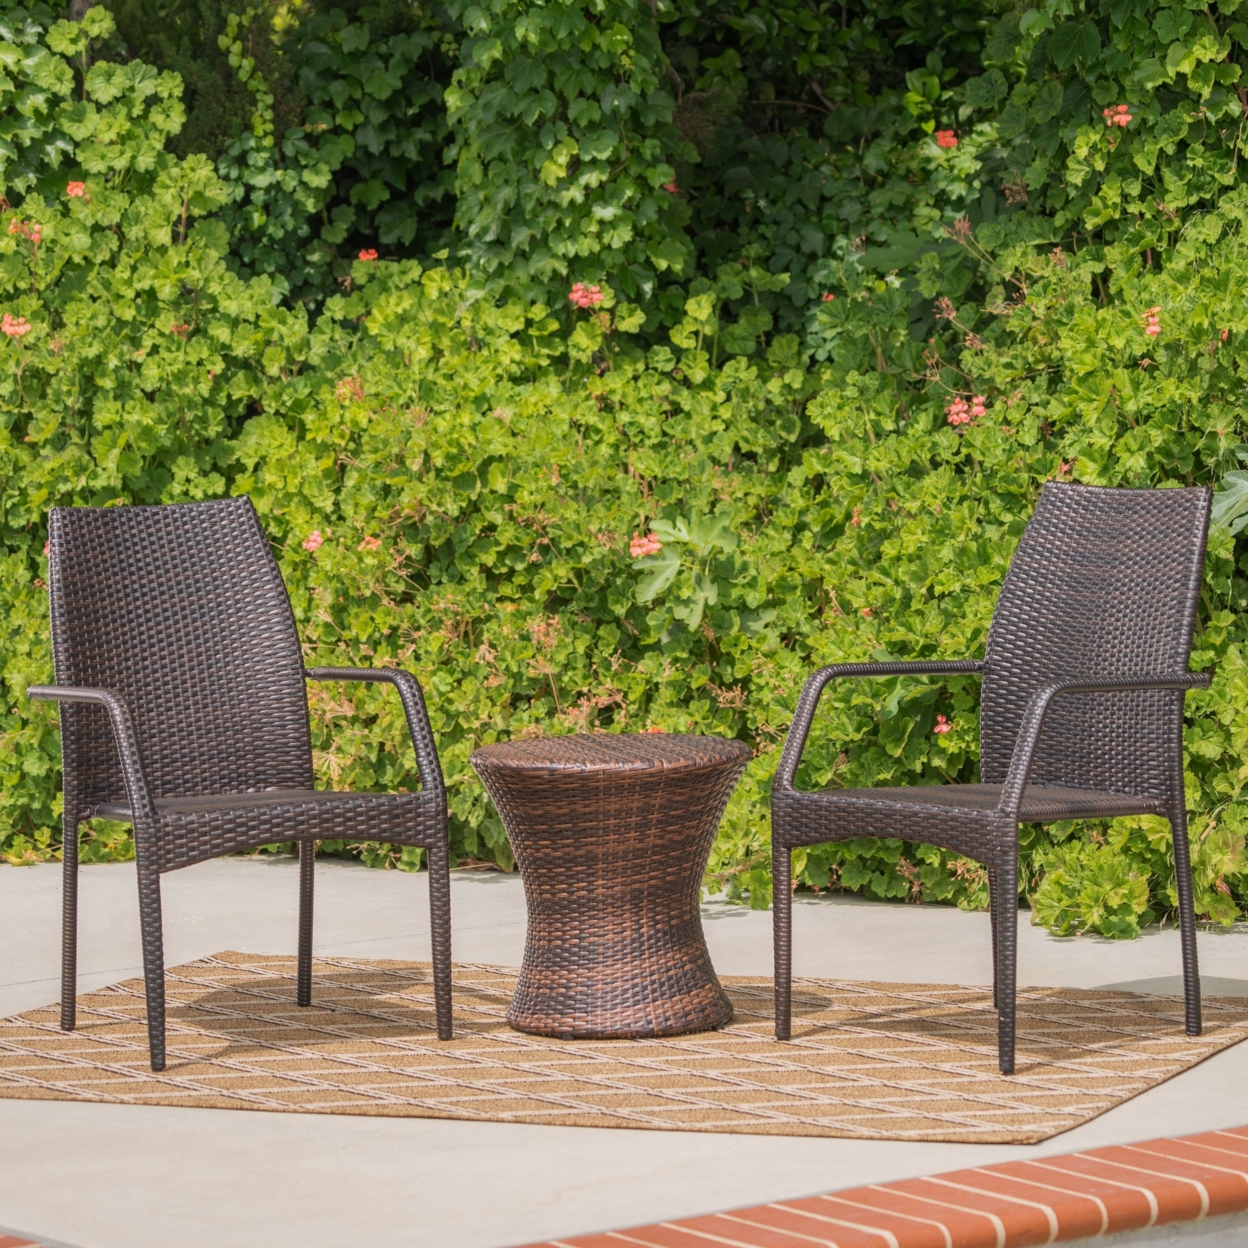 Dawson Outdoor 3 Piece Multi-brown Wicker Stacking Chair Chat Set - Trapezoid Table, Brown